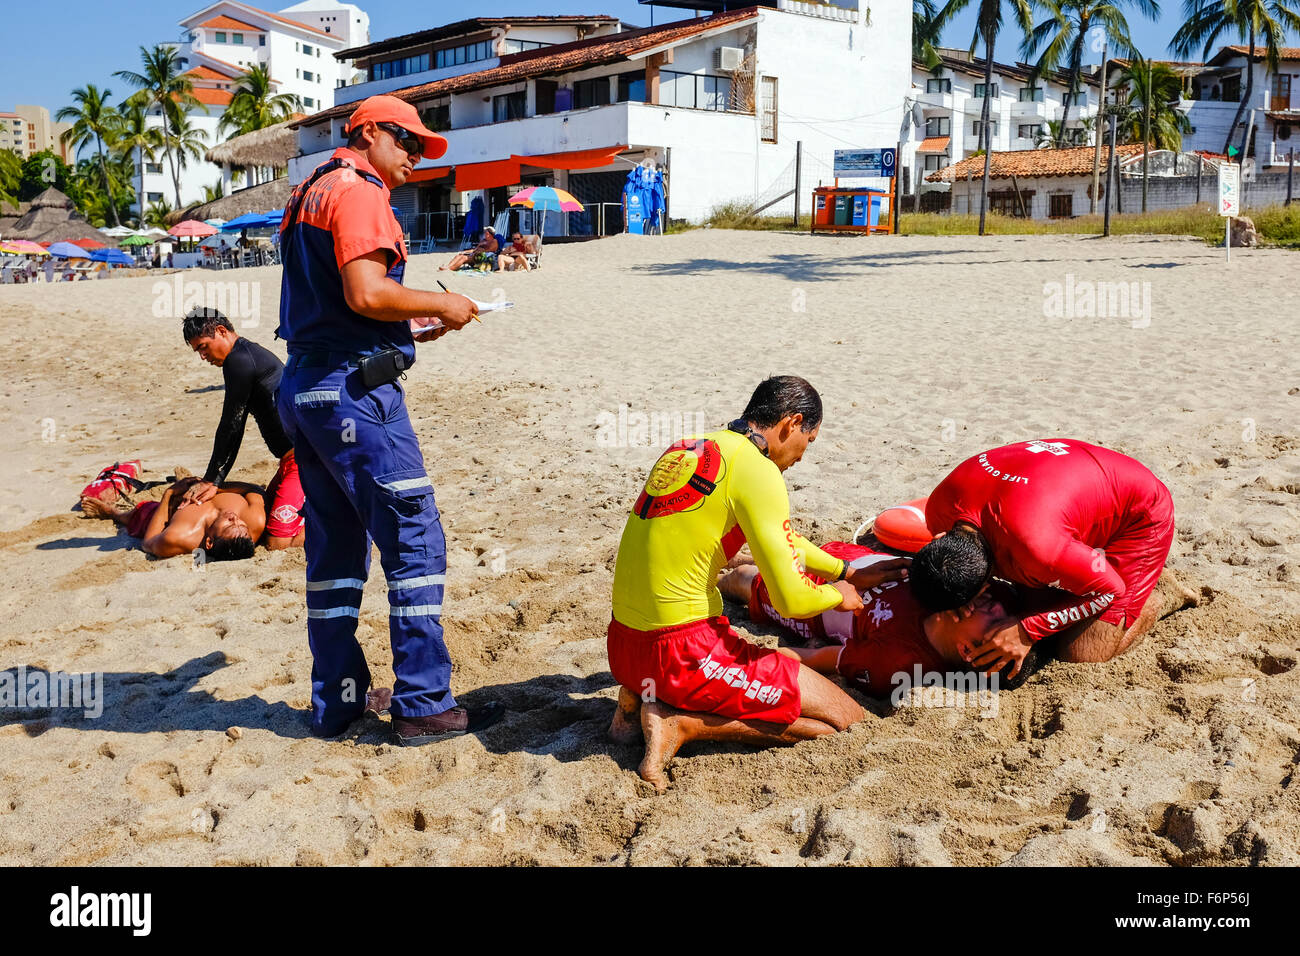 Lifeguards on the beach at Puerto Vallarta, Mexico undergoing training in rescue and lifesaving as part of their license require Stock Photo